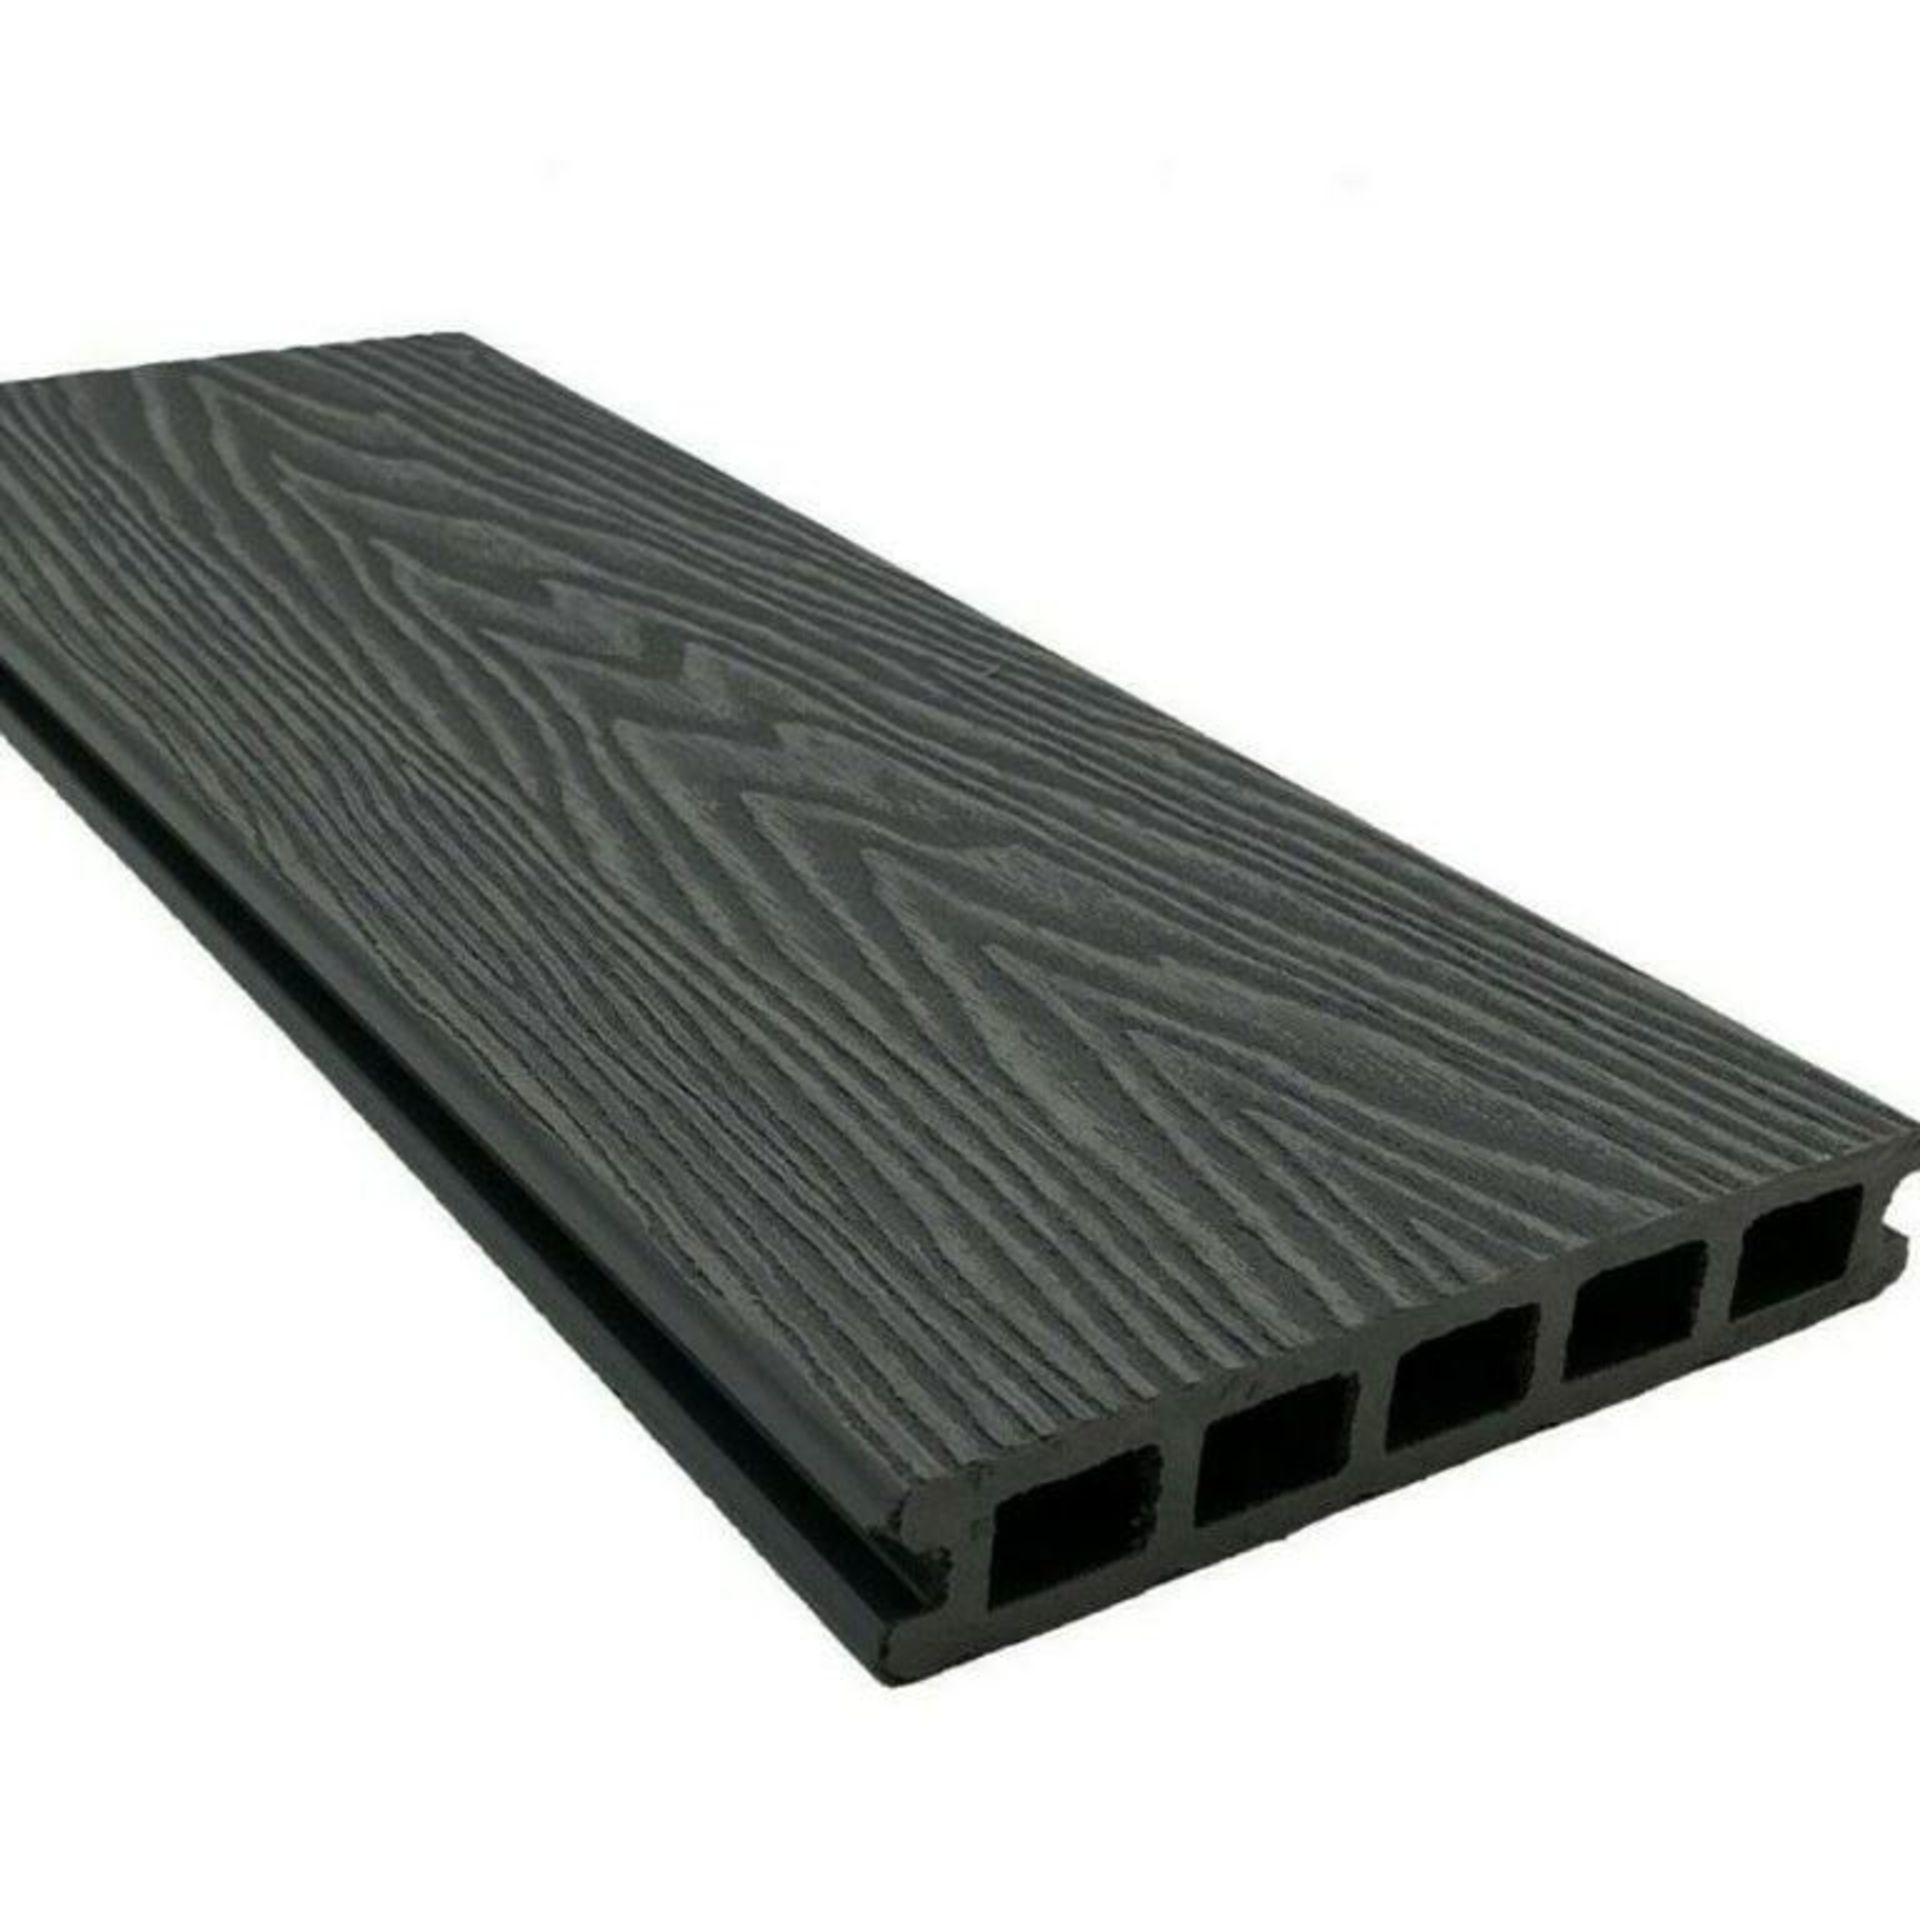 20x Composite Decking boards colour Weathered Ash